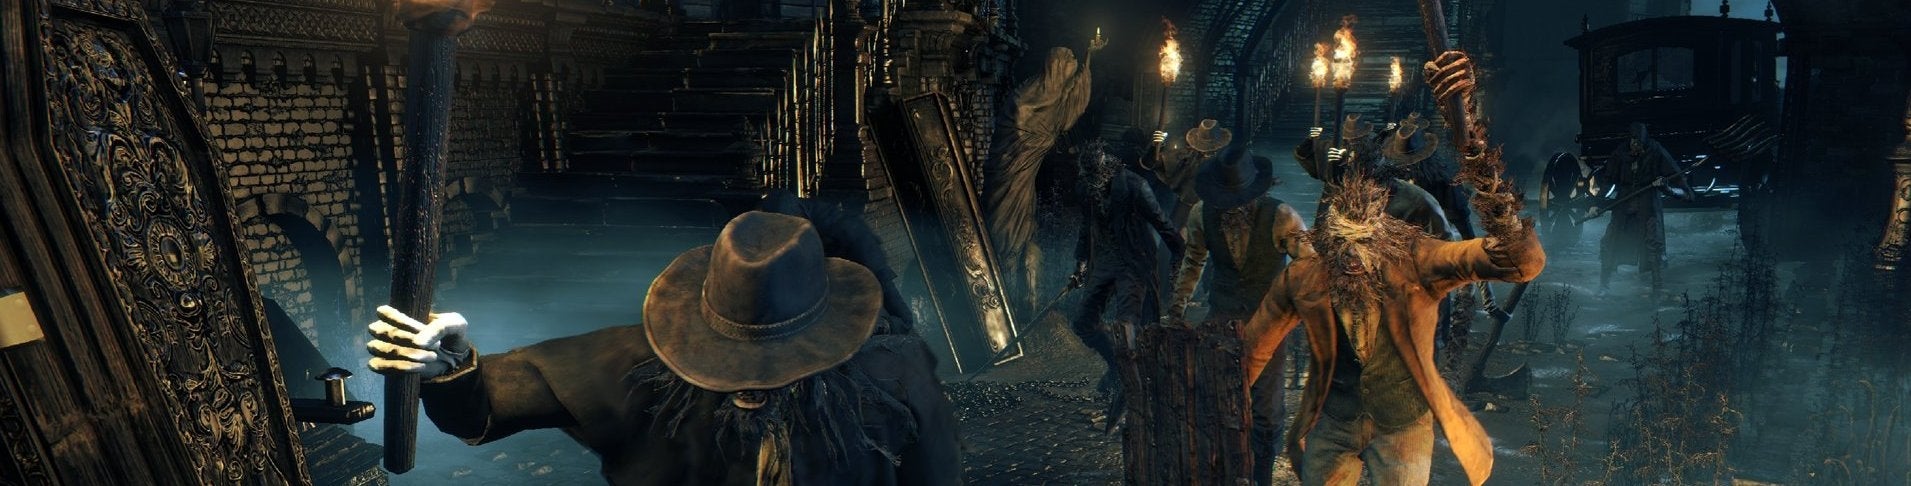 Image for Bloodborne's combat convinced me I don't need a sword and shield any more